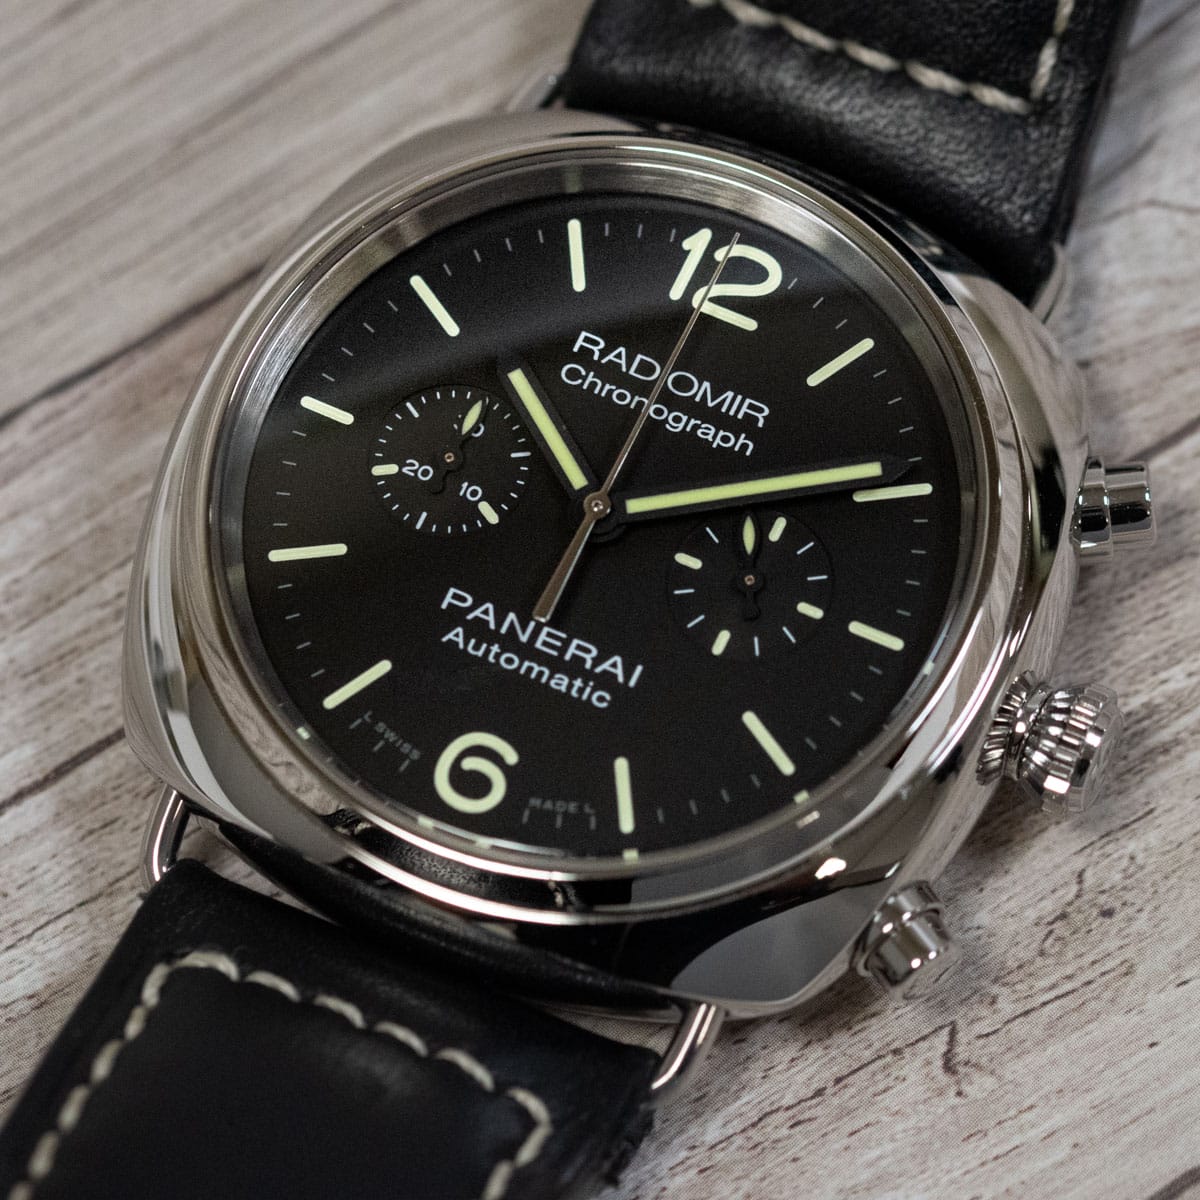 Stylied photo of  of Radiomir Chronograph